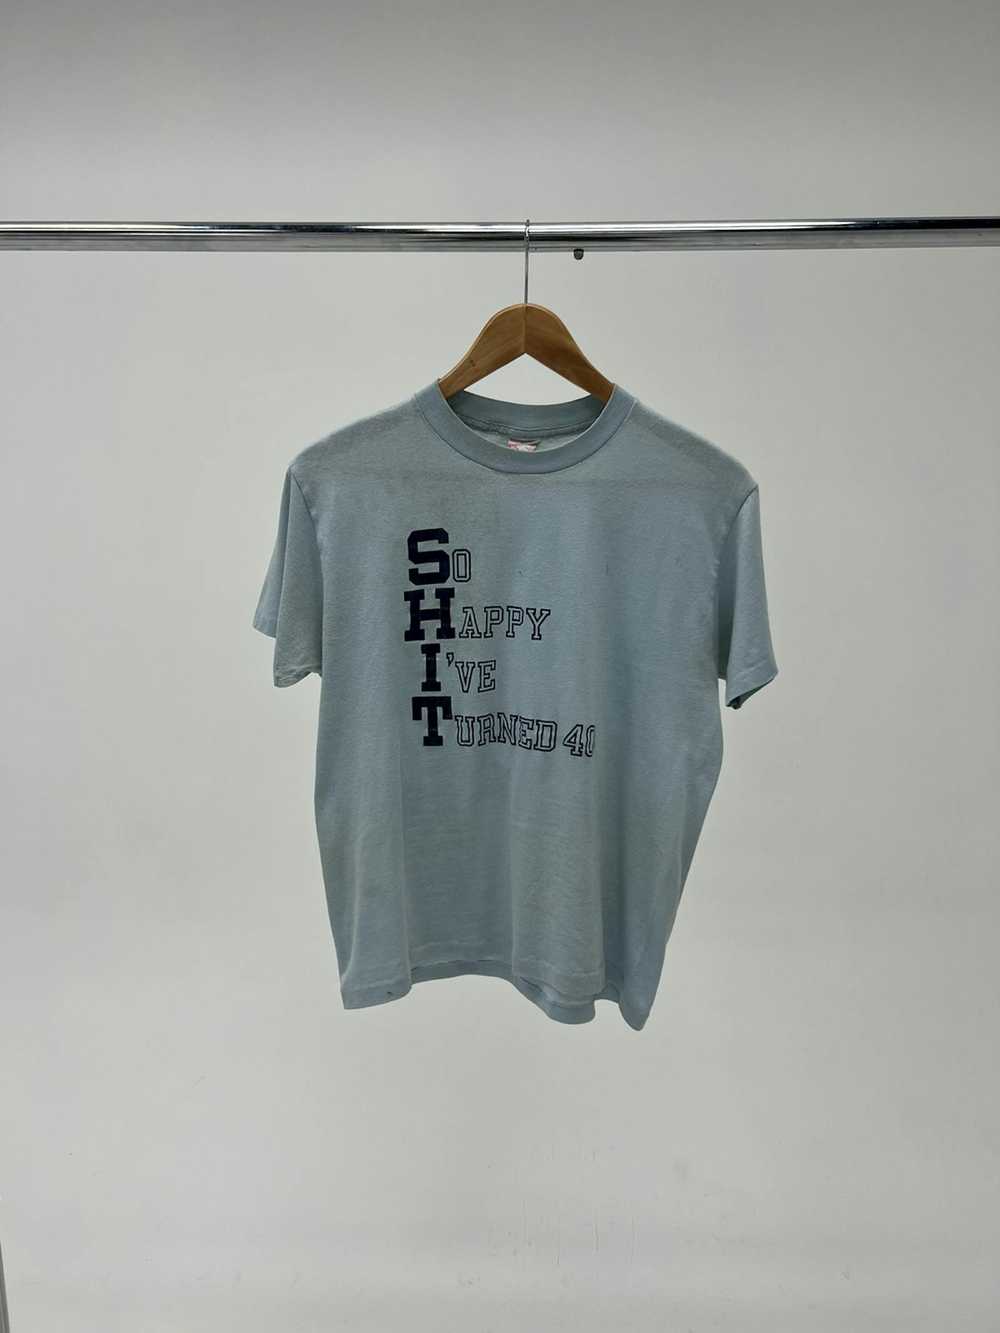 Made In Usa × Rare × Vintage Vintage 80s Funny Te… - image 1